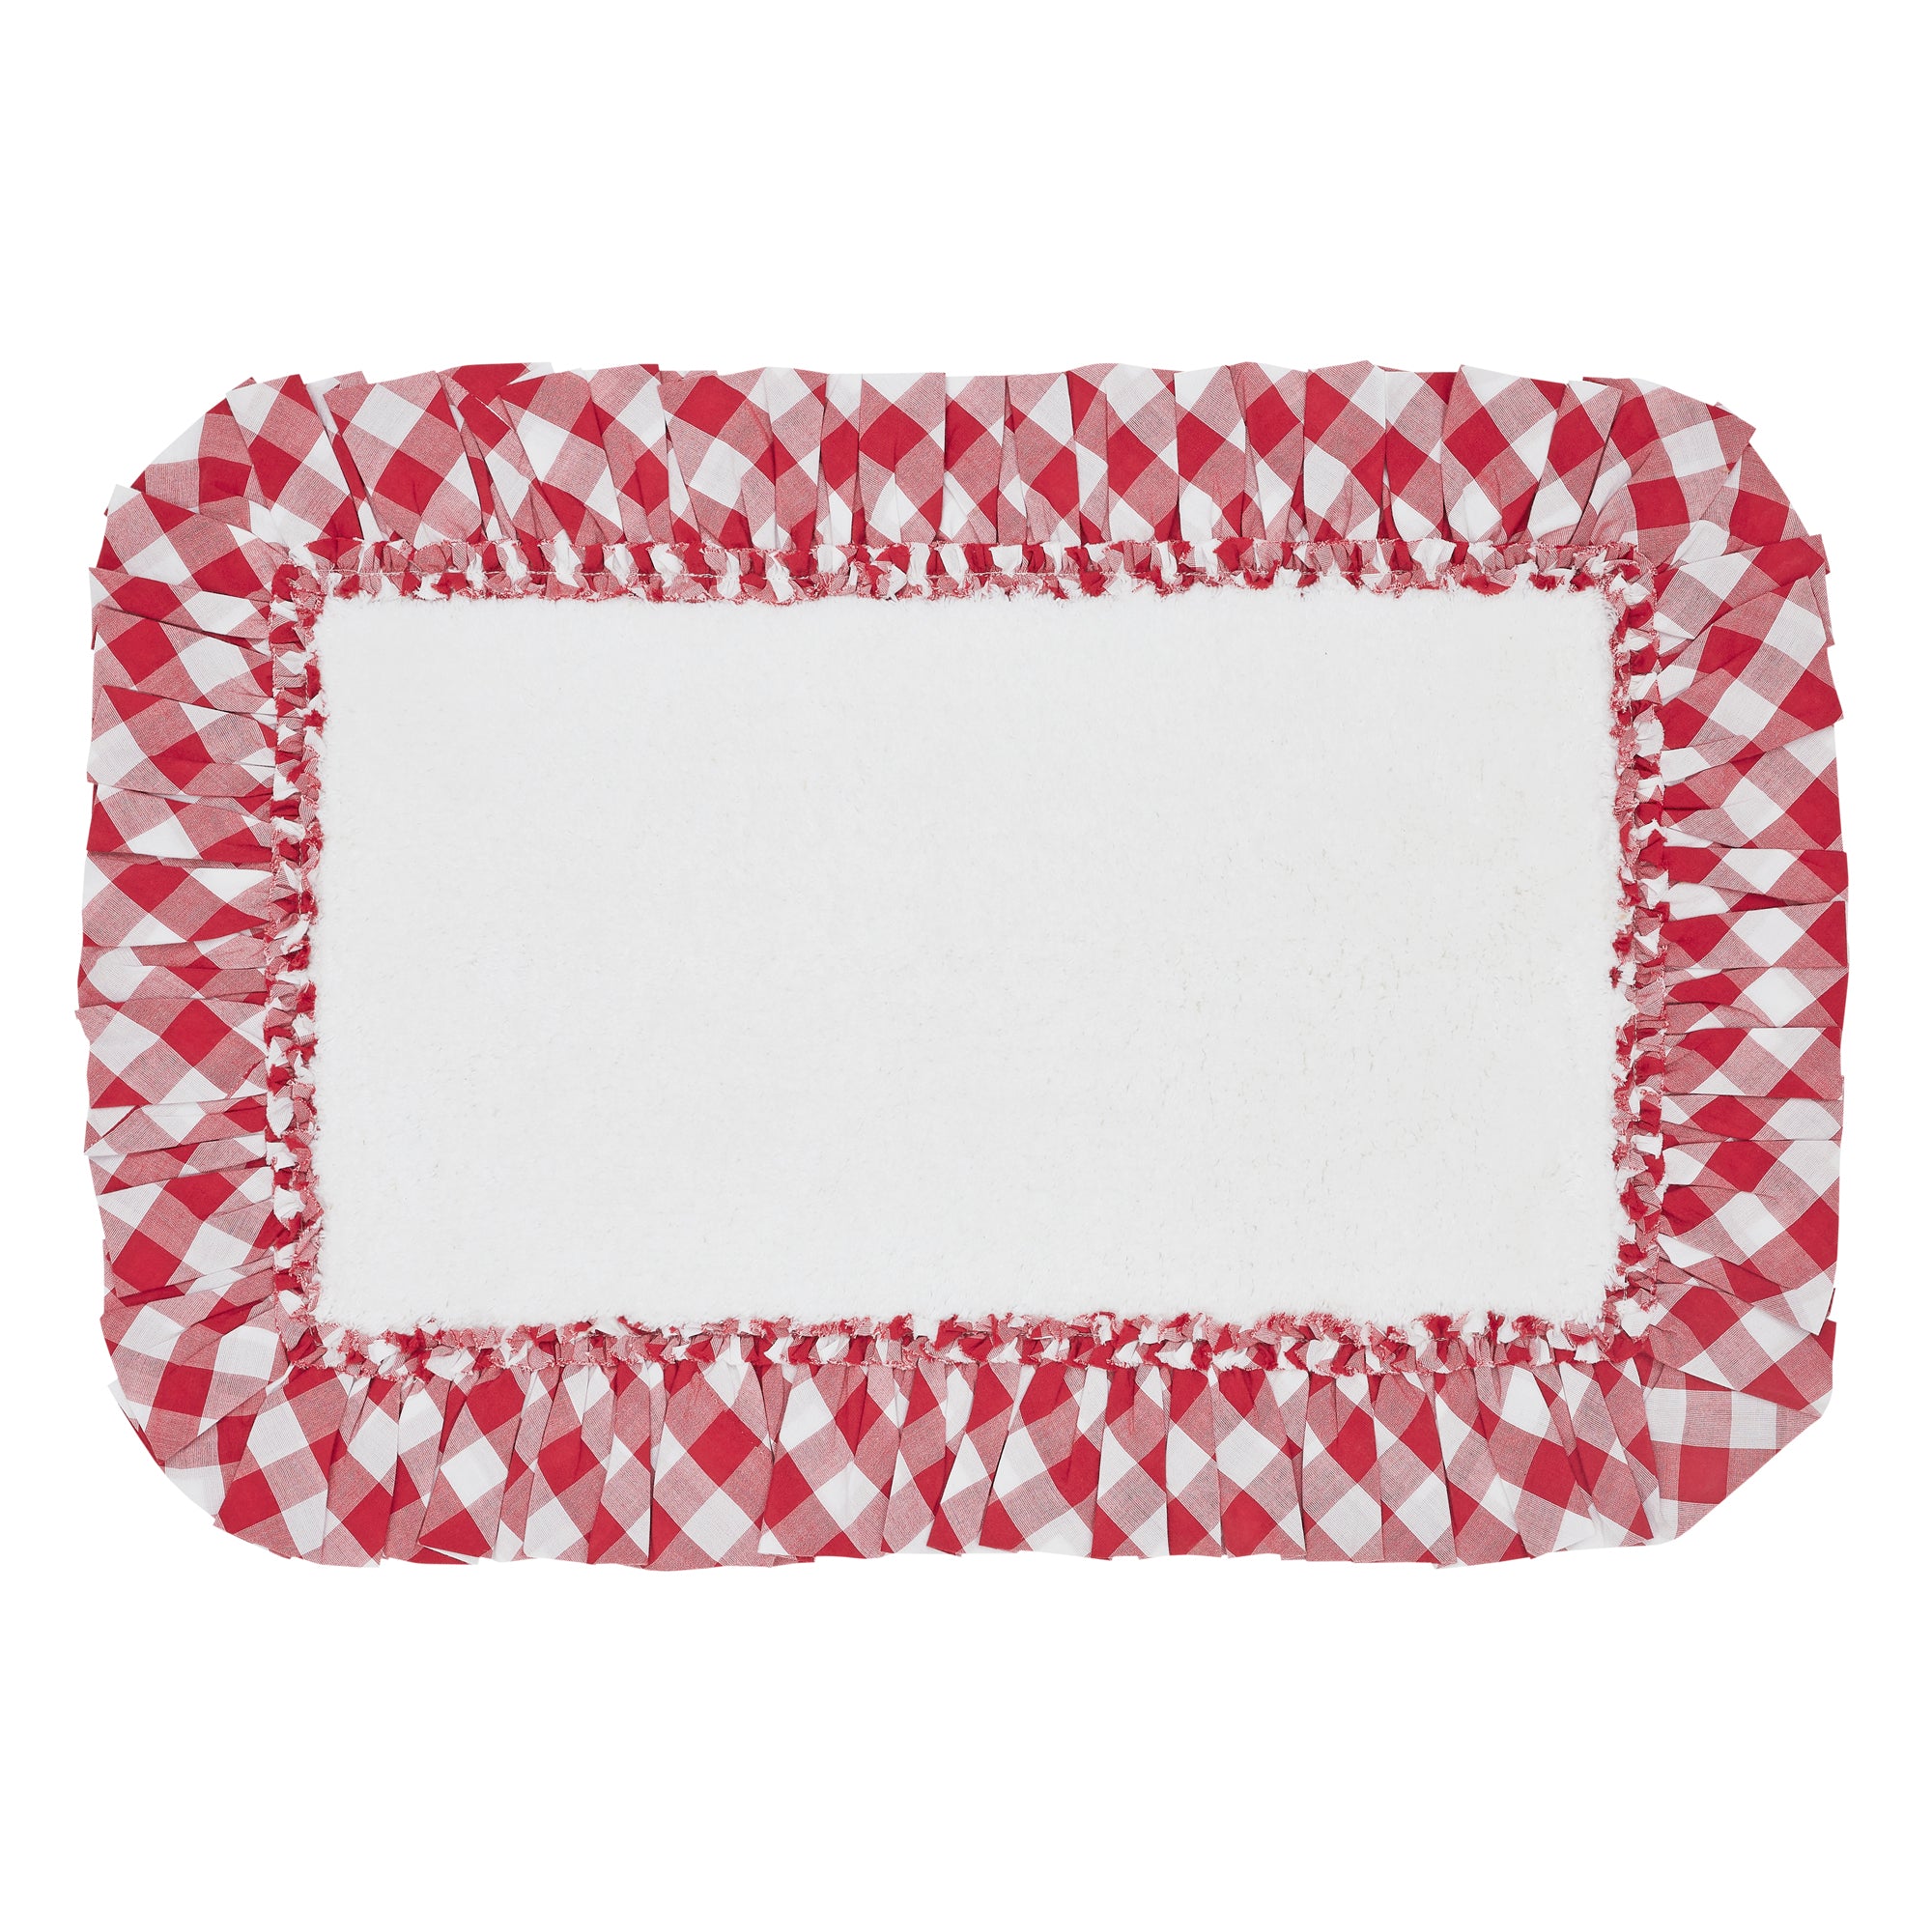 April & Olive Annie Buffalo Red Check Bathmat 20x30 By VHC Brands